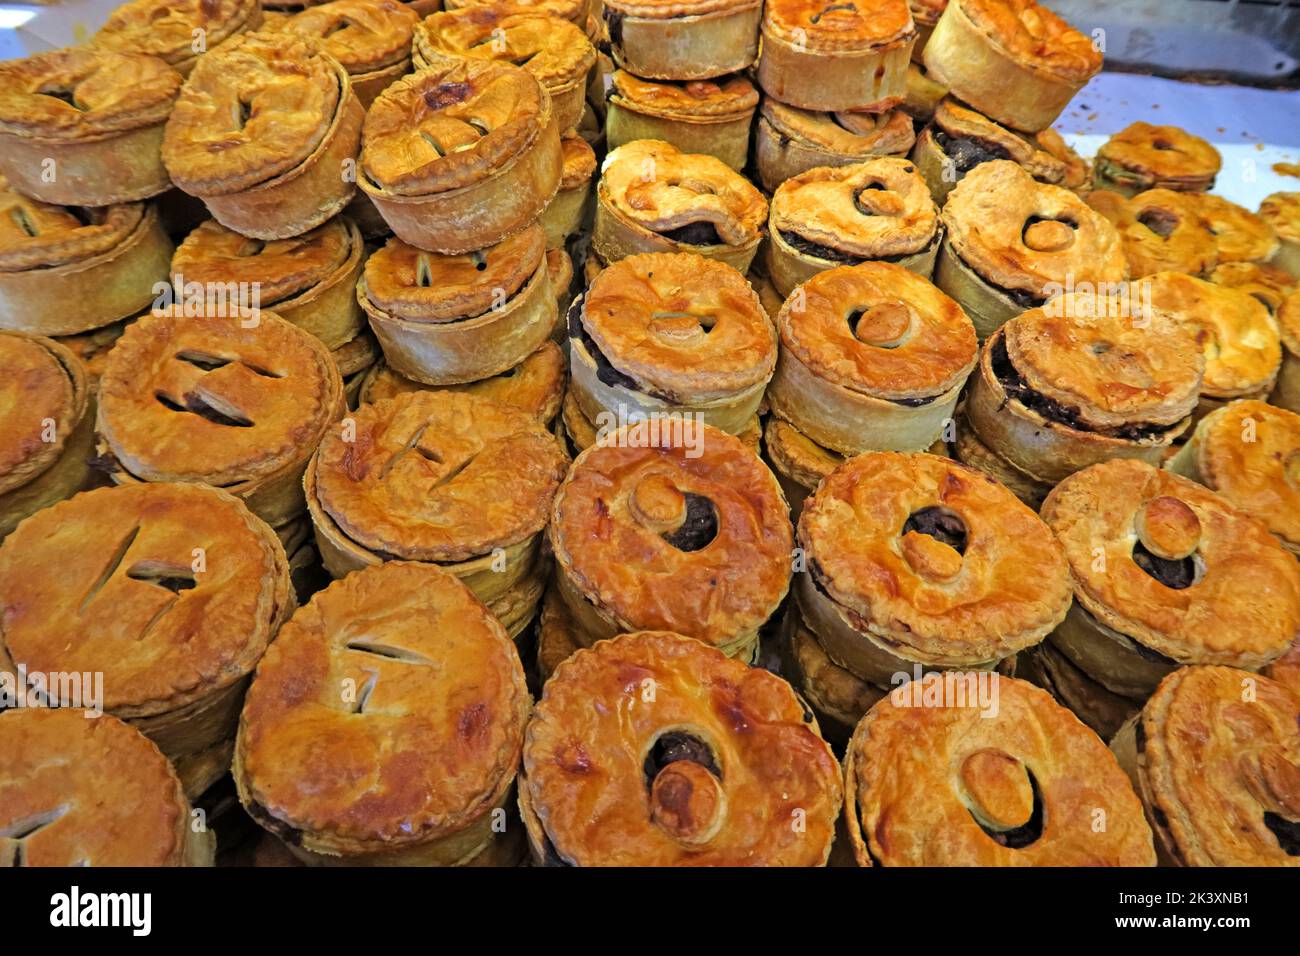 Pies at a bakers shop, piled up for retail purchase, Callandar, Scotland, UK Stock Photo